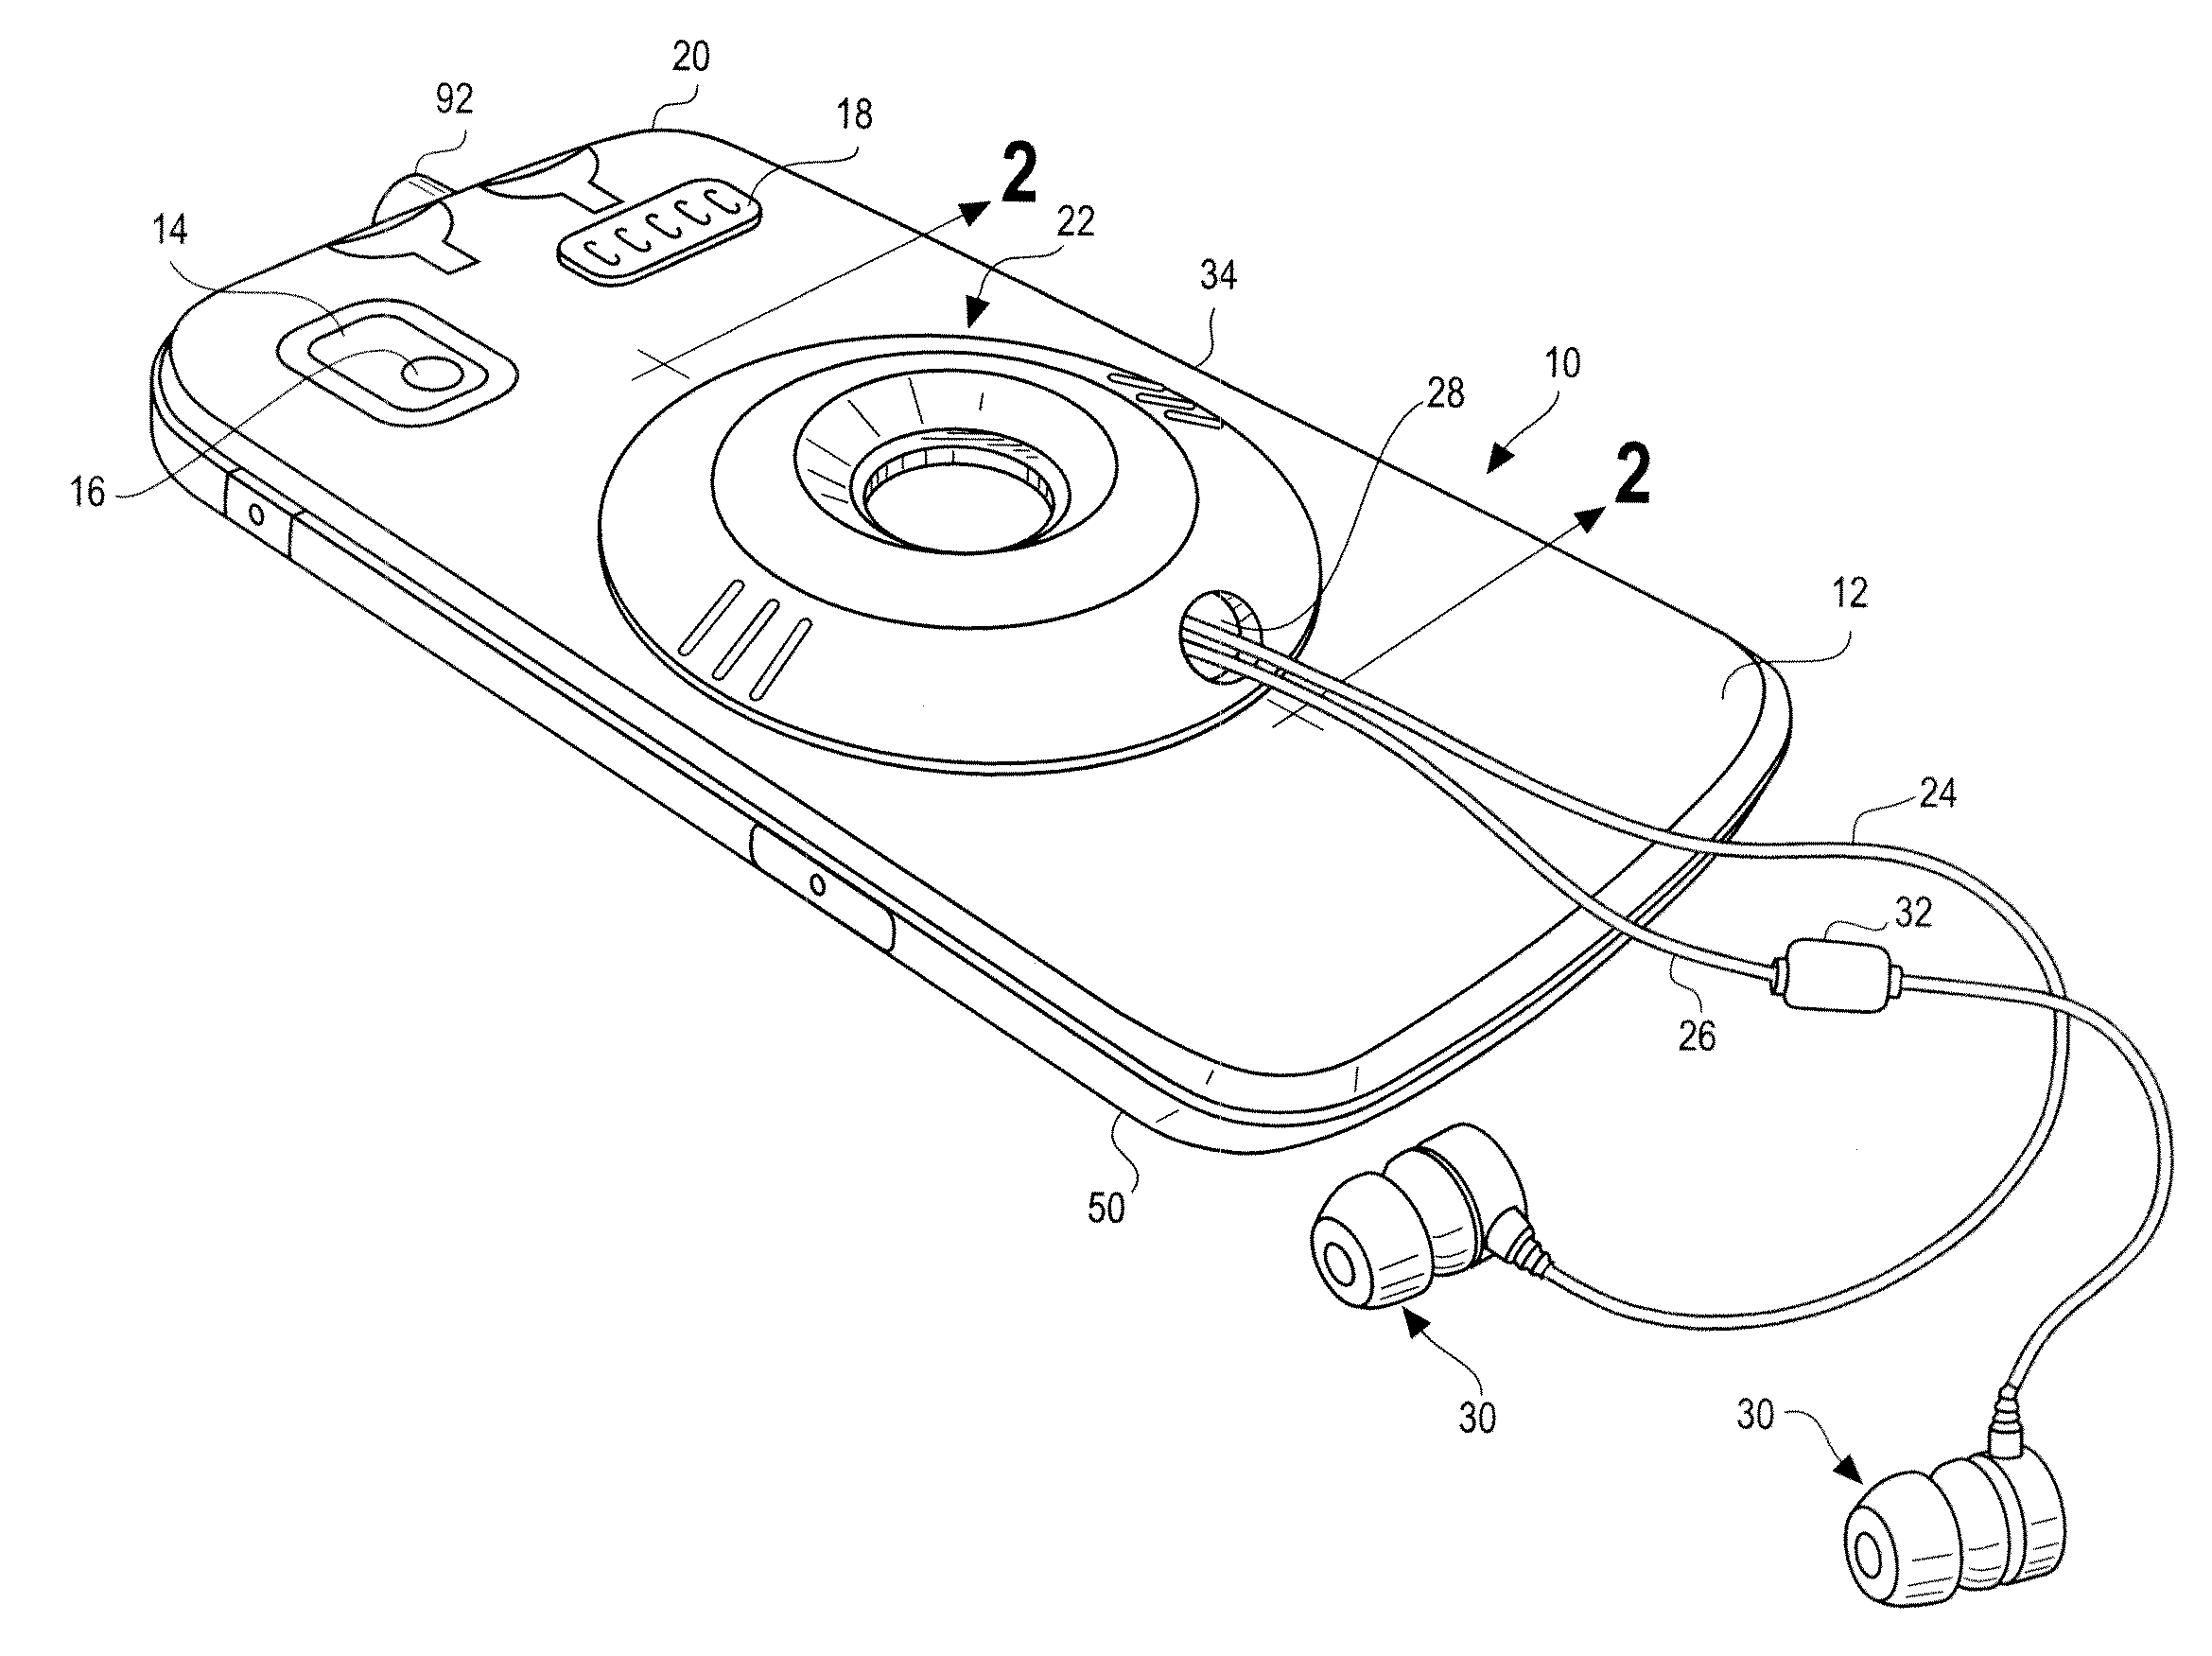 Attachable Extendable and Retractable Earpiece Cable Assembly for Mobile Communication and Sound Devices